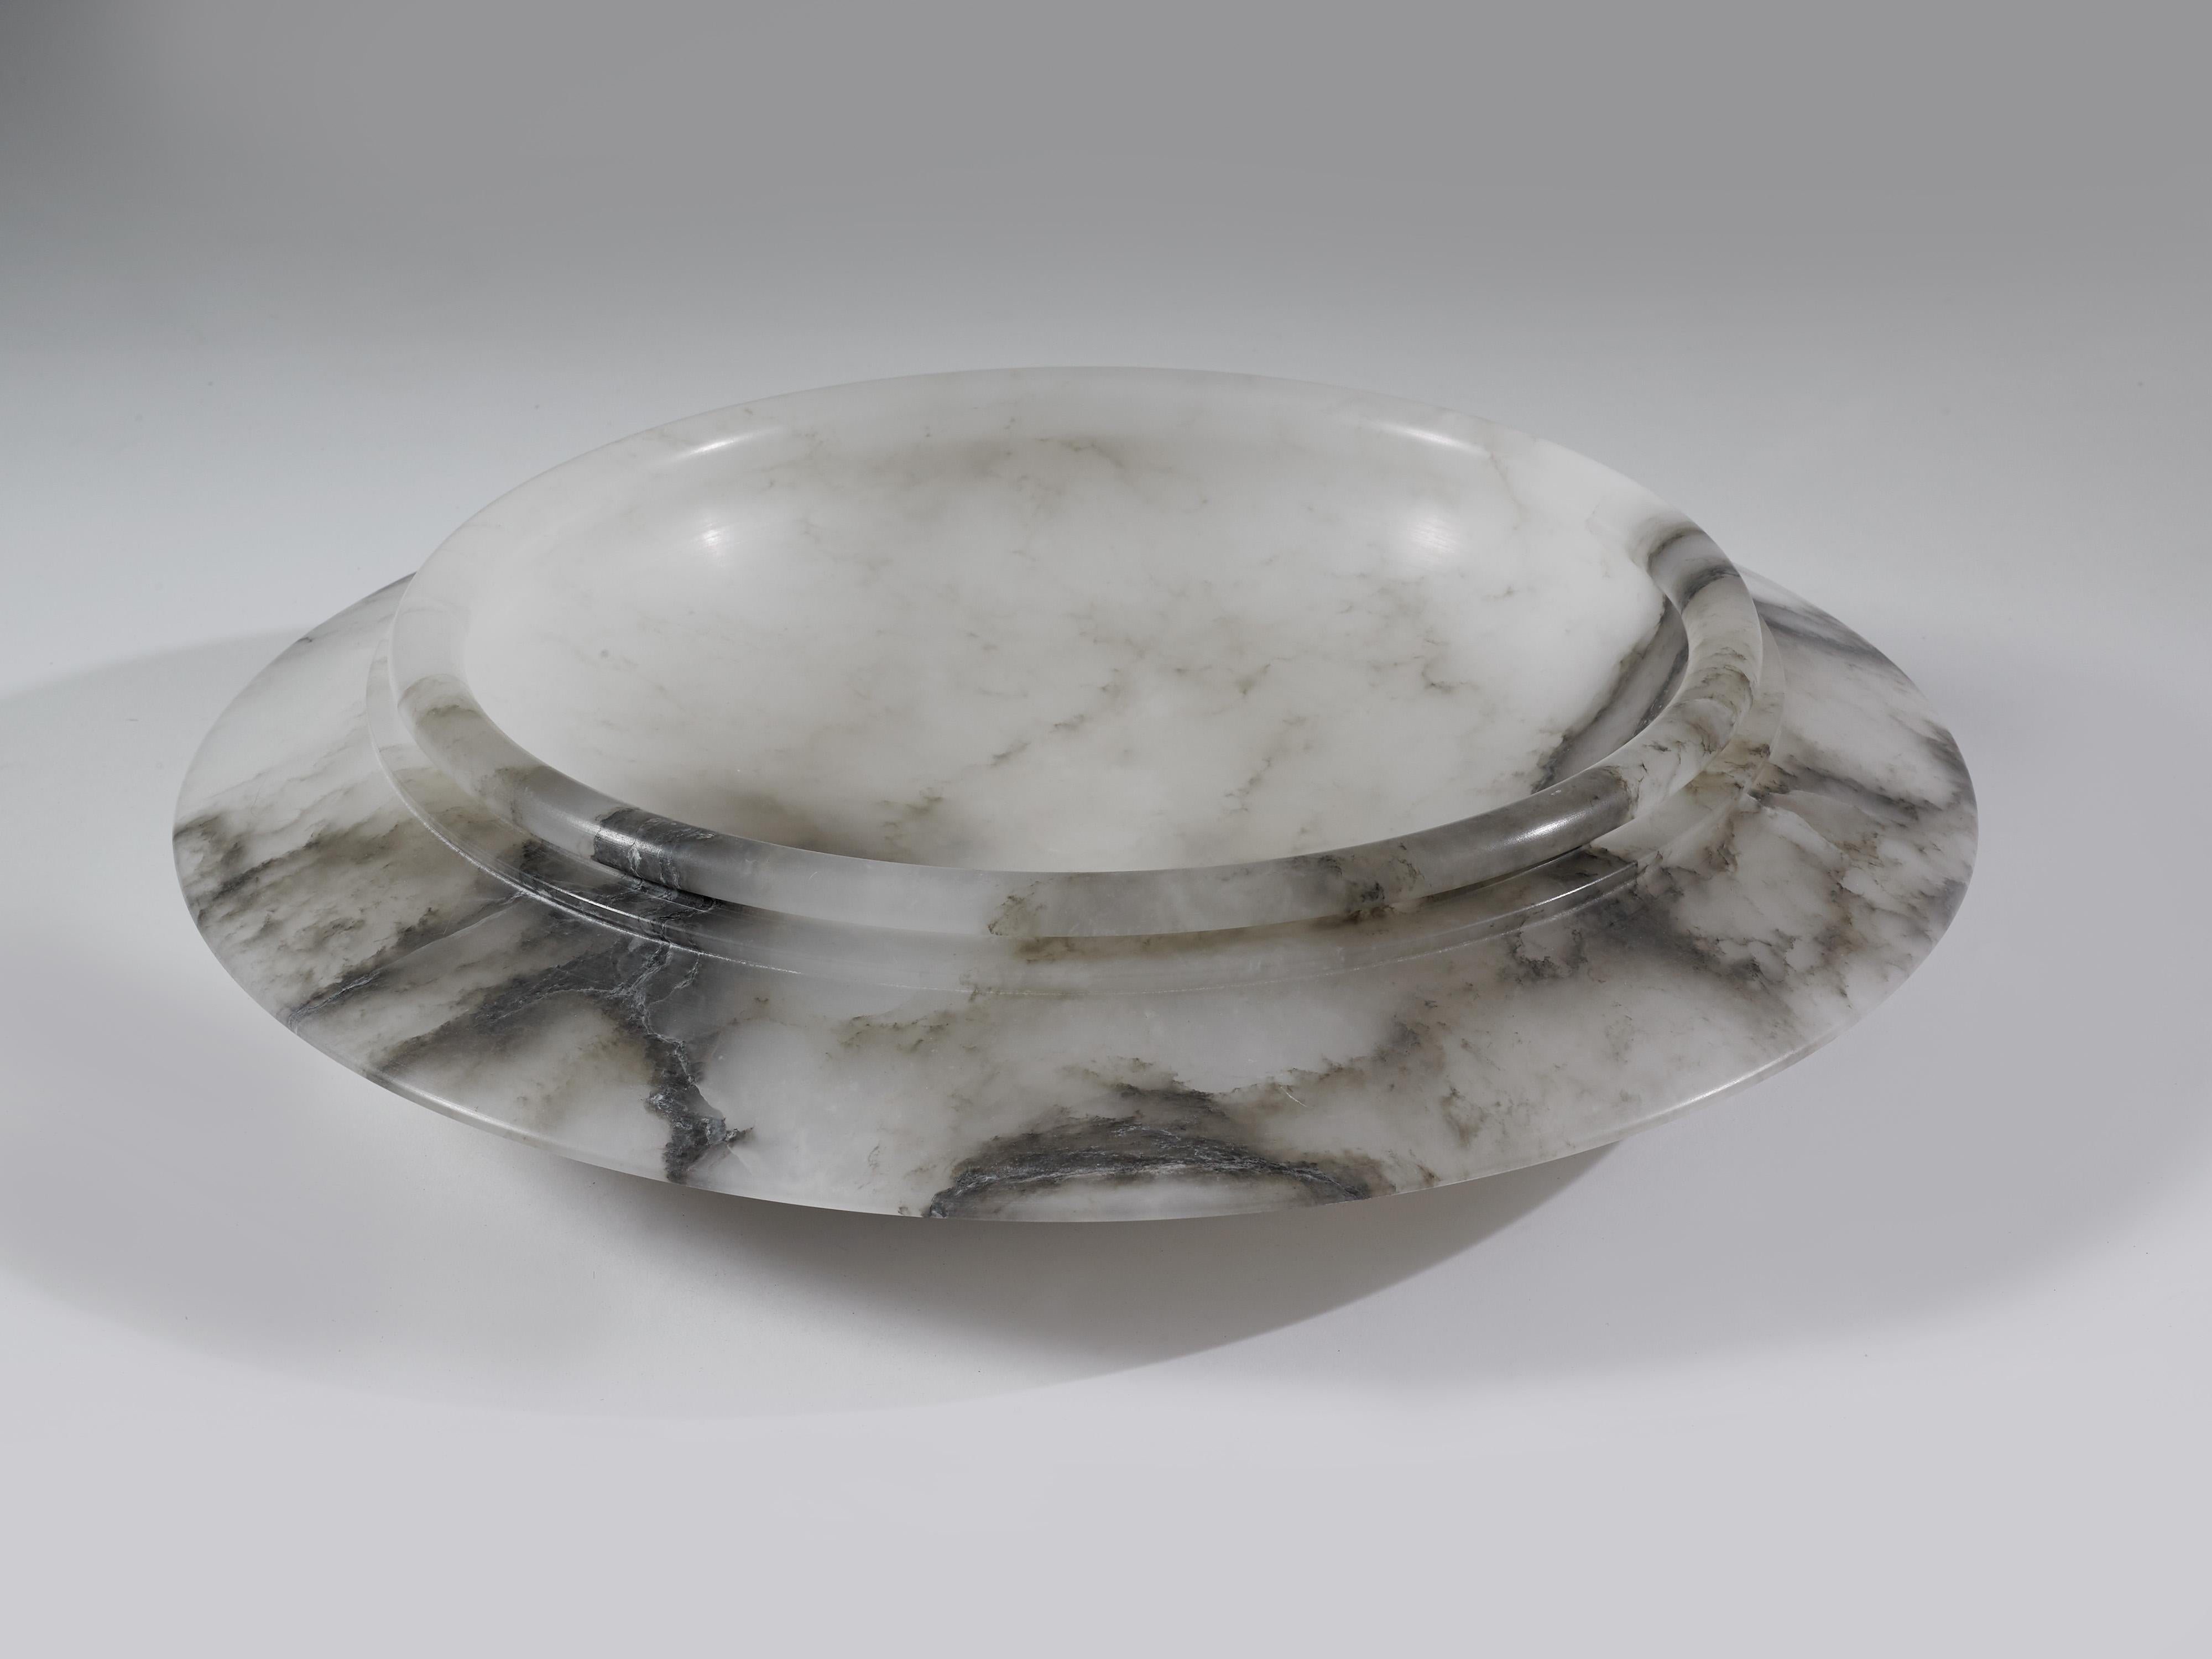 Large white alabaster plate, with a beautiful grey vein, from the hills of Tuscany. Made in 2019, for Urban Art.

This handsome piece makes a beautiful center piece for a dinning room, as alabaster is much lighter than stone or marble, making it a